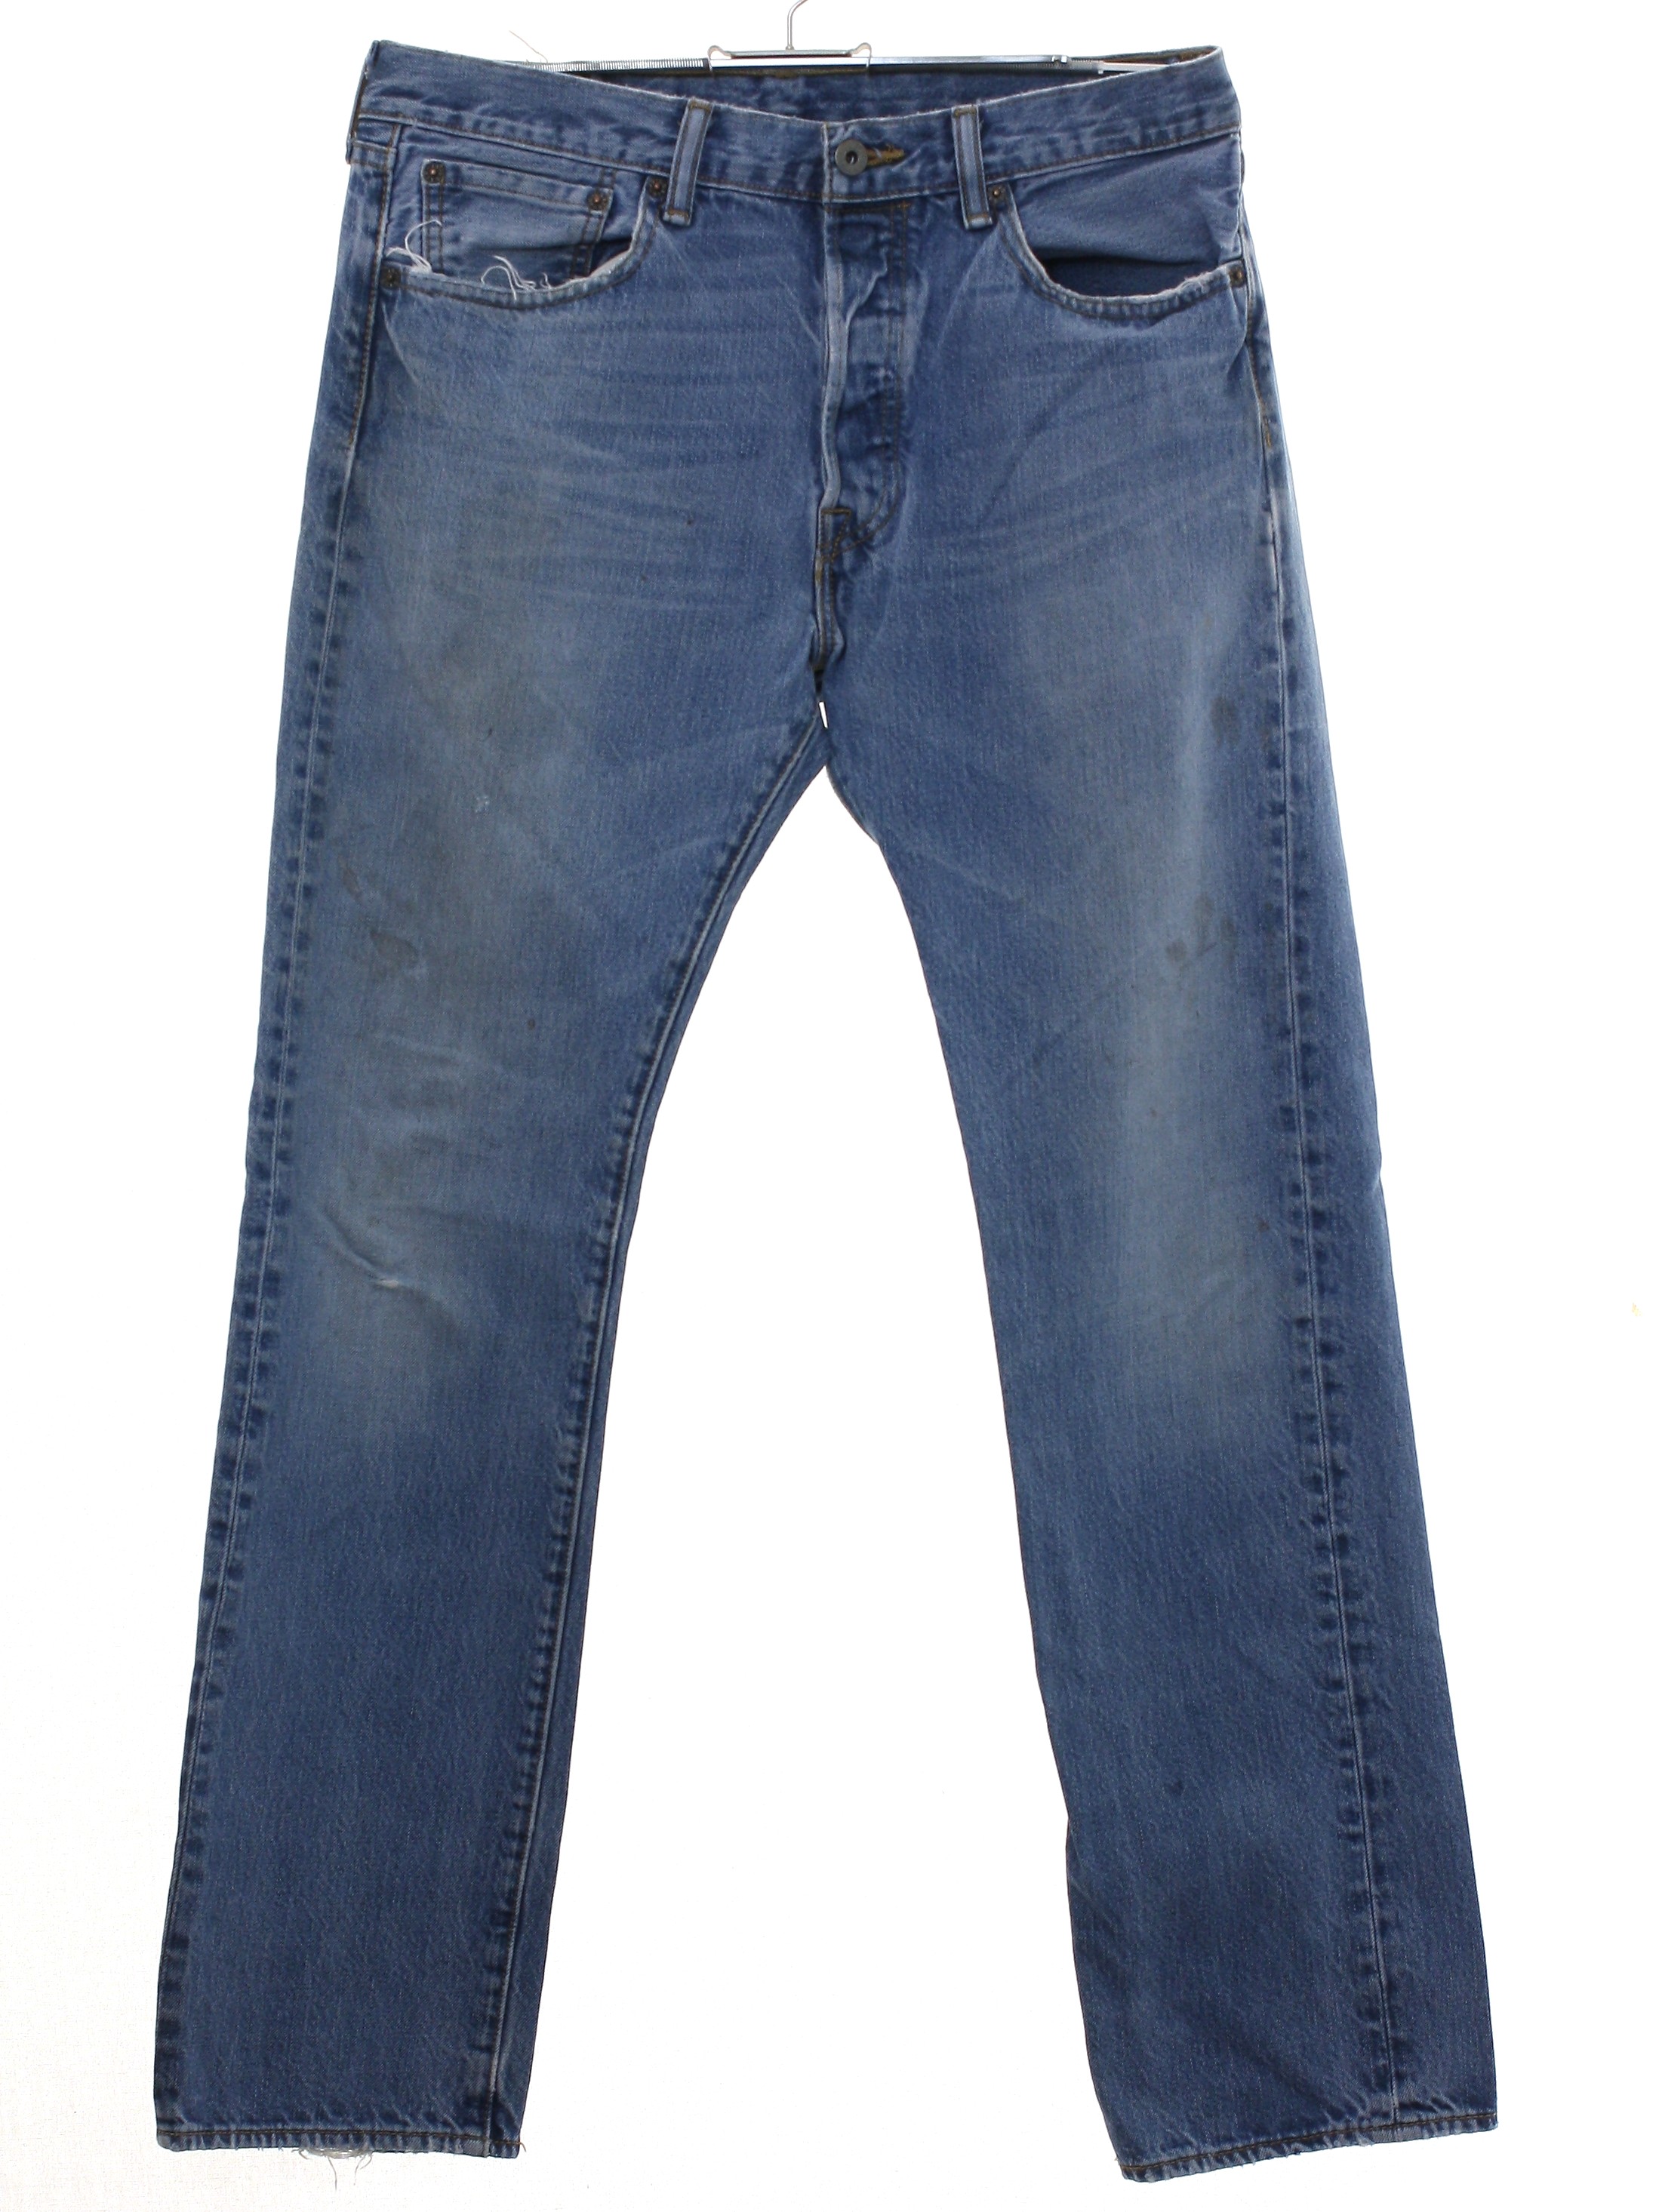 Pants: 90s -Levis 501- Mens heavily faded and worn medium blue cotton ...